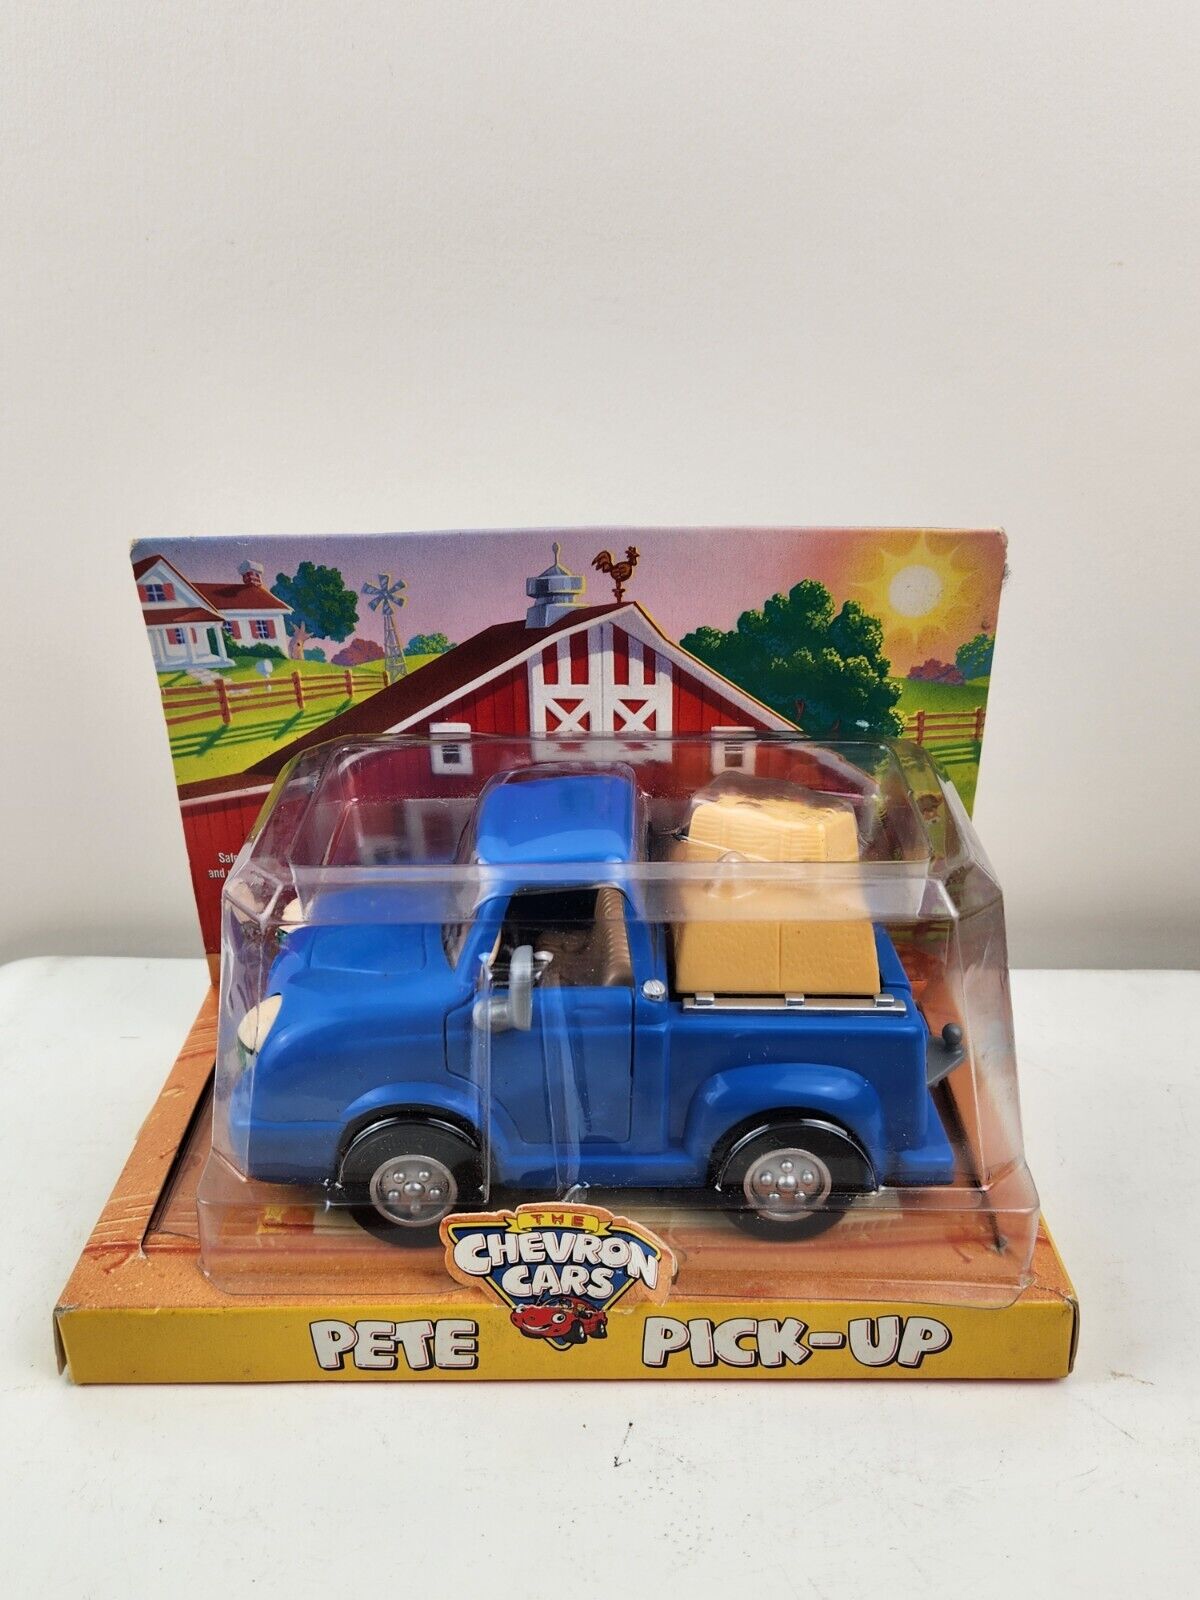 The Chevron Cars PETE PICK-UP 1997 New In Box Truck